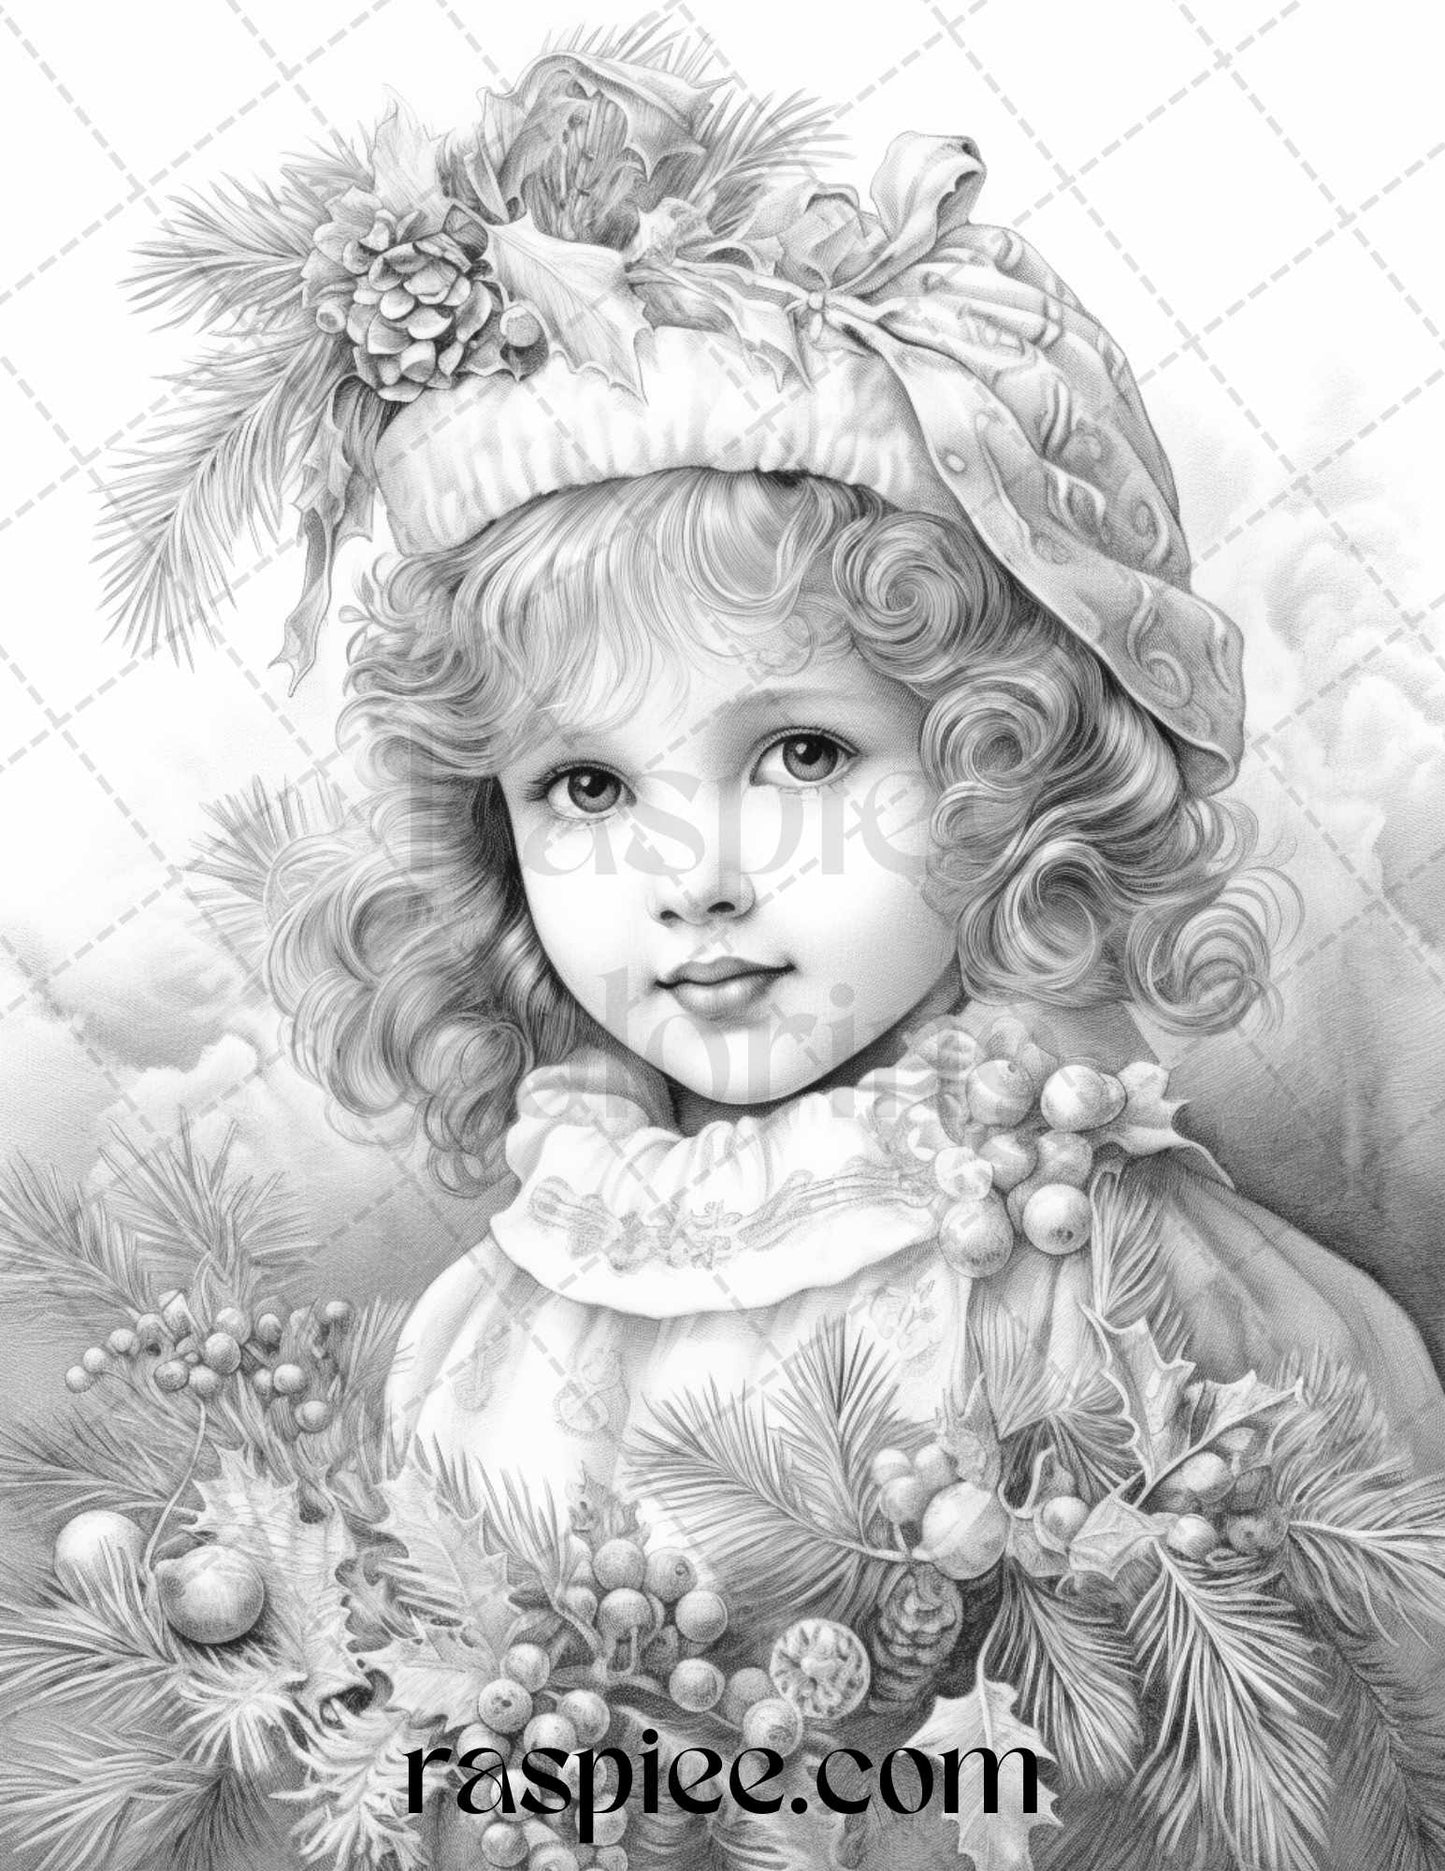 Vintage Christmas Girls Coloring Pages, Printable Adult Grayscale Coloring Sheets, Retro Holiday Illustrations for Coloring, Christmas Coloring Book for Adults, Nostalgic Holiday Coloring Activities, xmas coloring pages printable